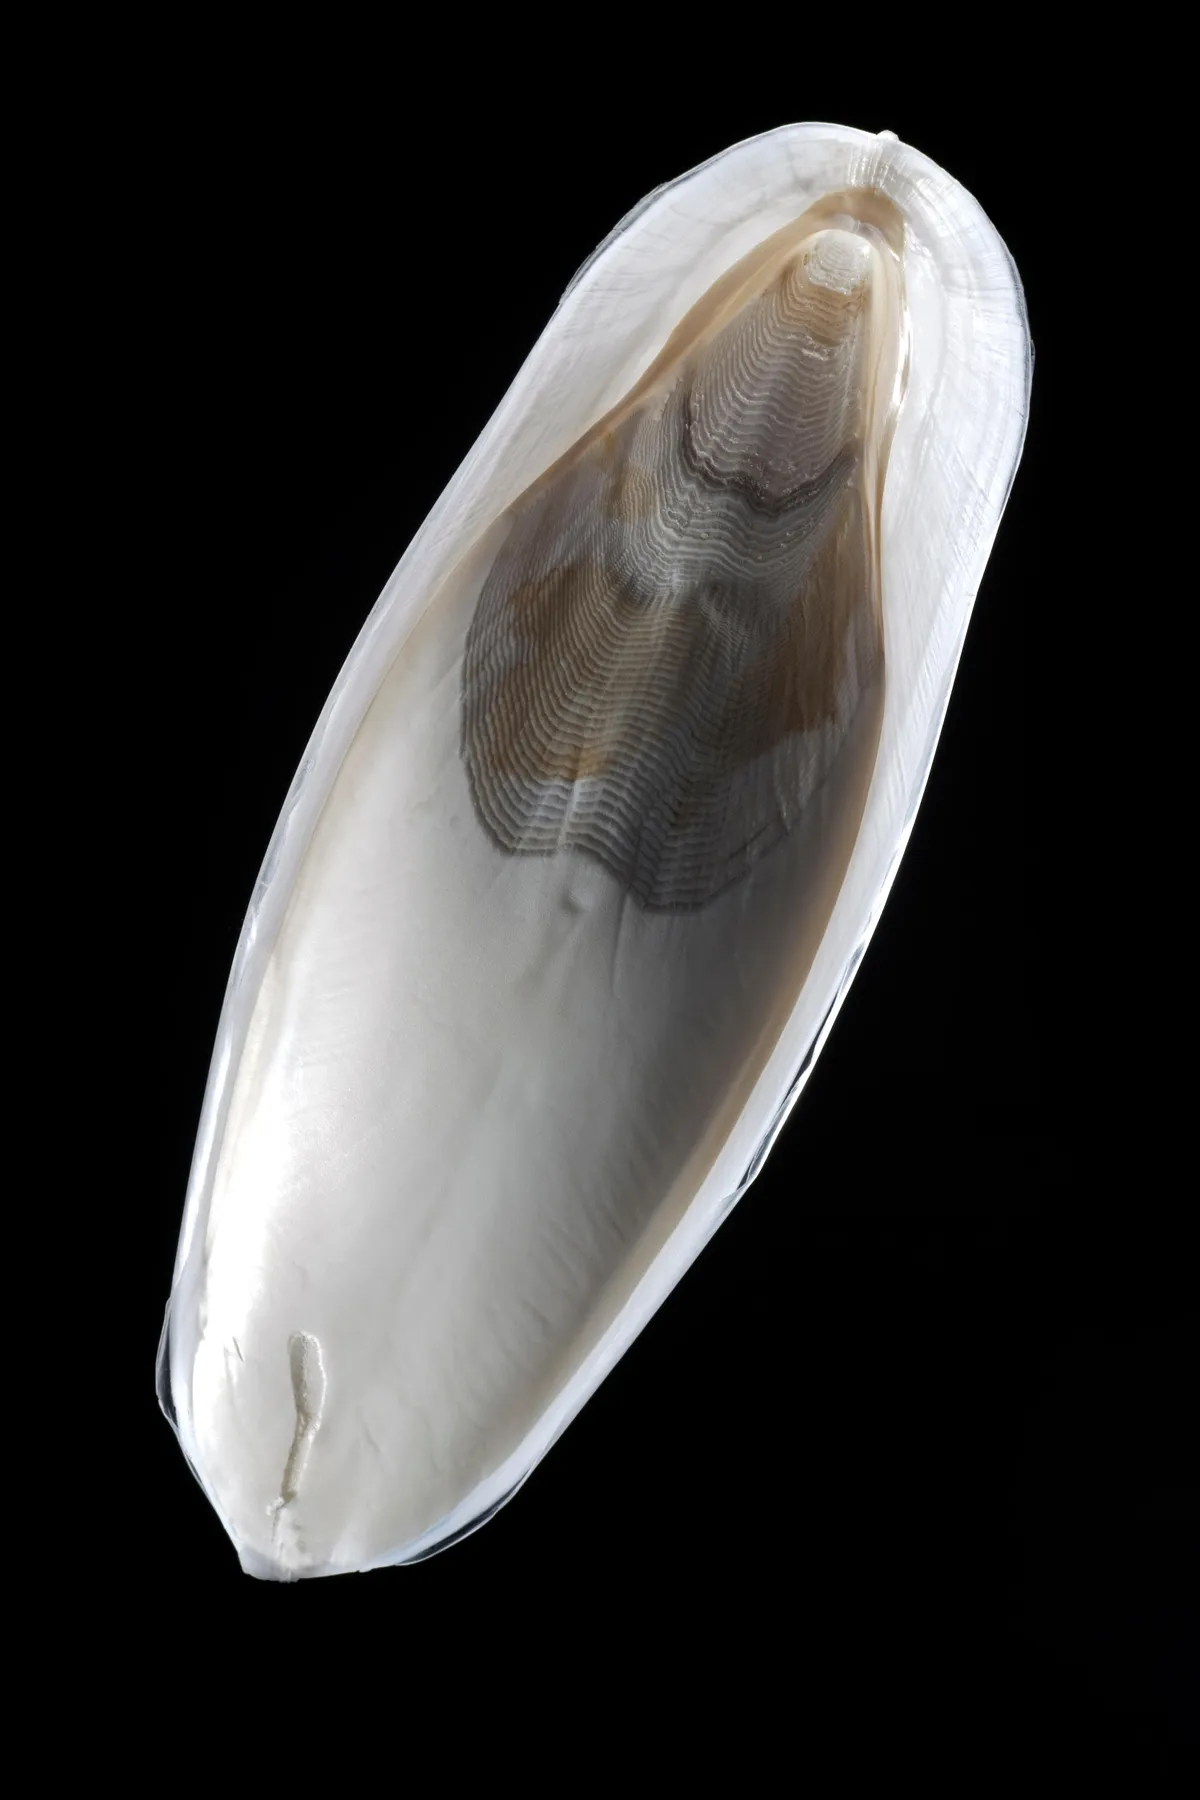 A cuttlebone from the cuttlefish Sepia officinalis caught in the English Channel Dorset UK photographed on a black background./© Alamy